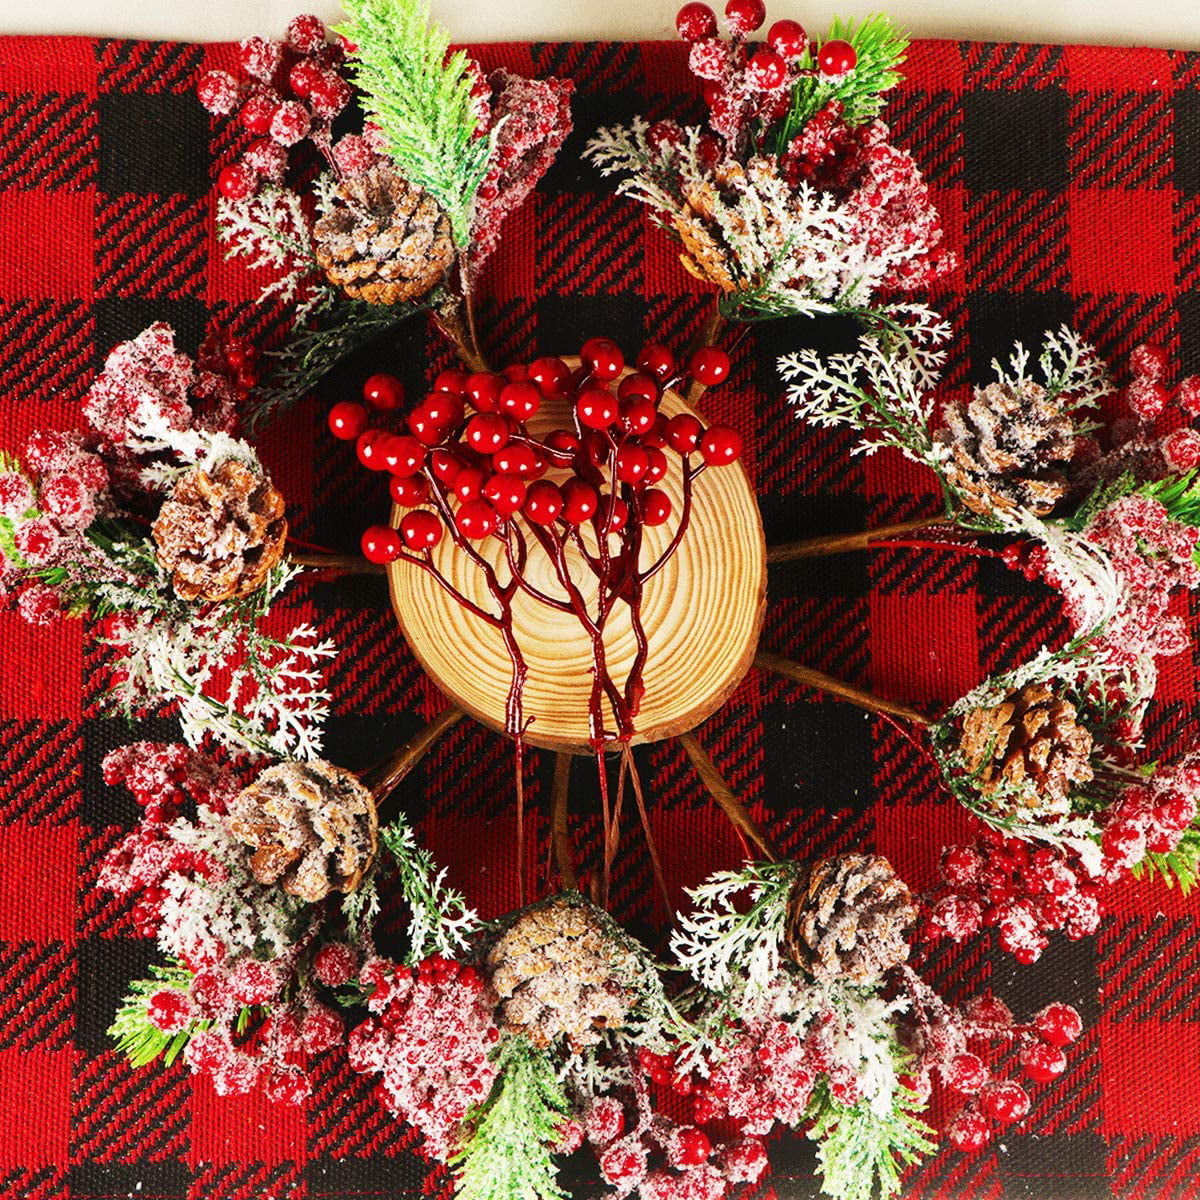 Set of 24: Burgundy Holly Berry Stems with 35 Lifelike Berries, 17-Inch, Festive Holiday Decor, Trees, Wreaths, & Garlands, Christmas Picks, Home  & Office Decor